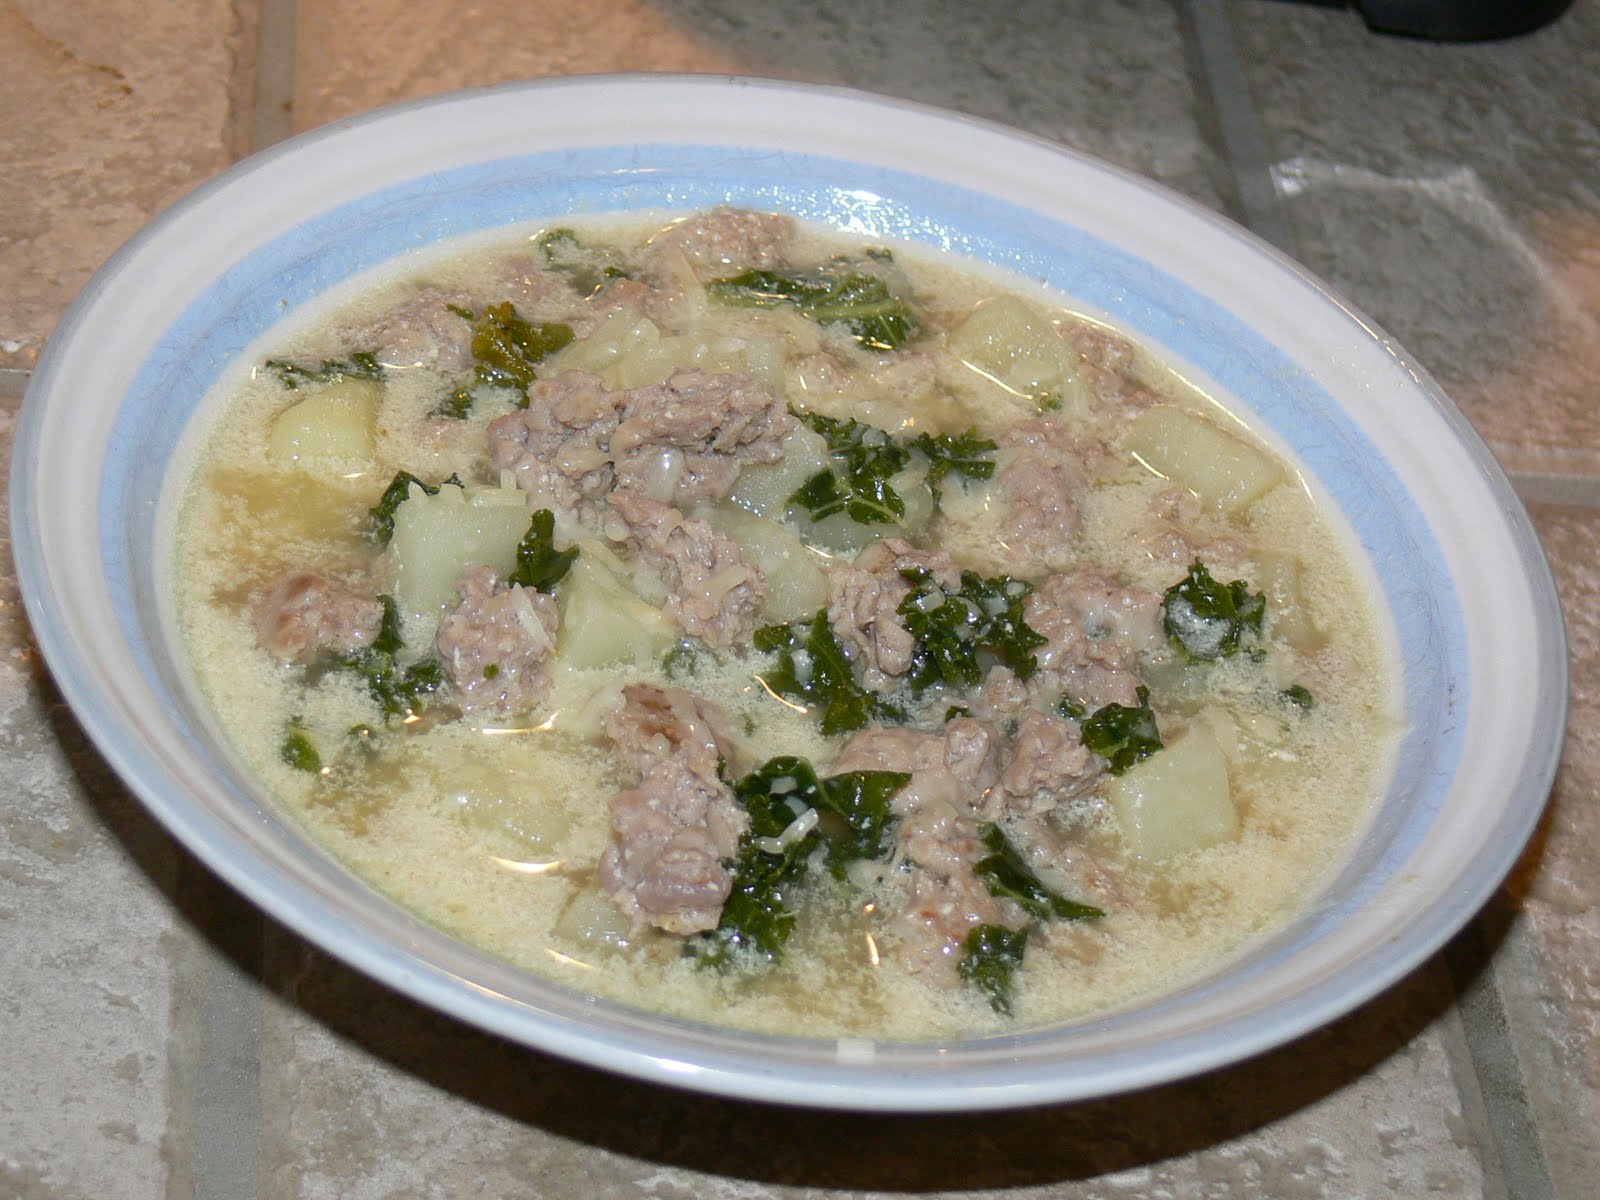 In the Kitchen with Jenny: Zuppa Toscana (Tuscan Soup - Sausage & Potatoes)